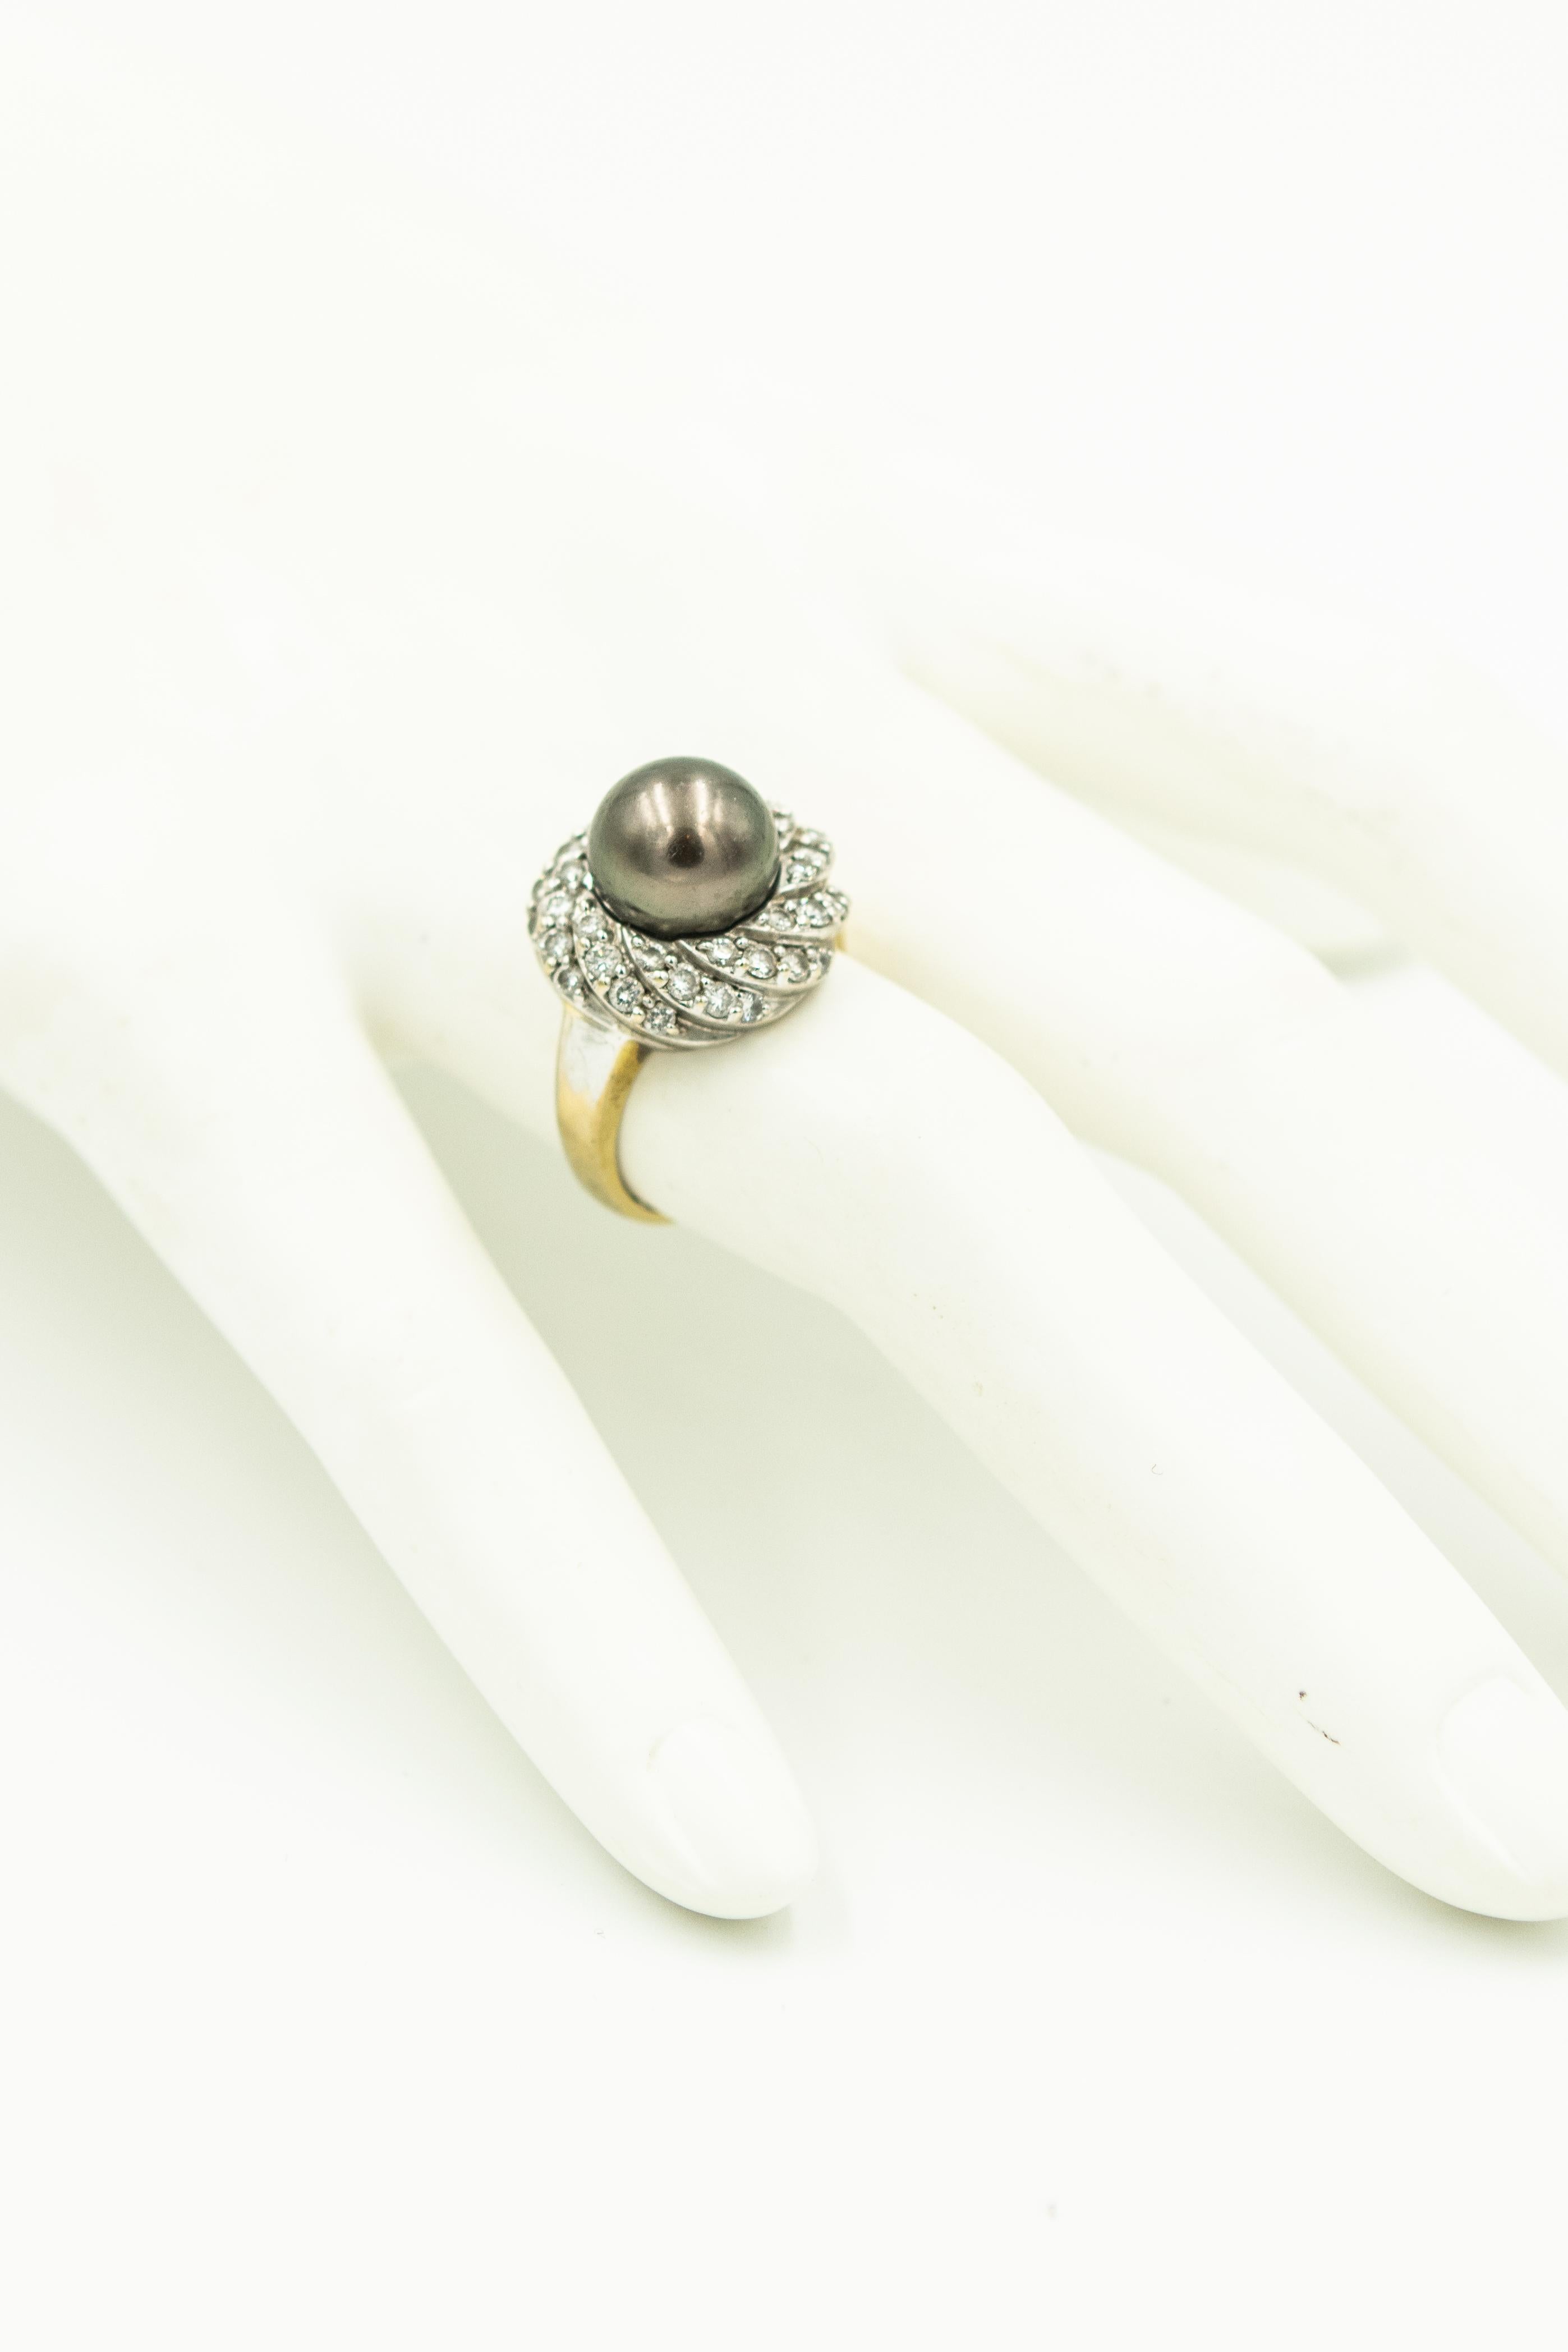 Gray Pearl and Diamond White Gold Cocktail Ring and Earrings Suite Set 2